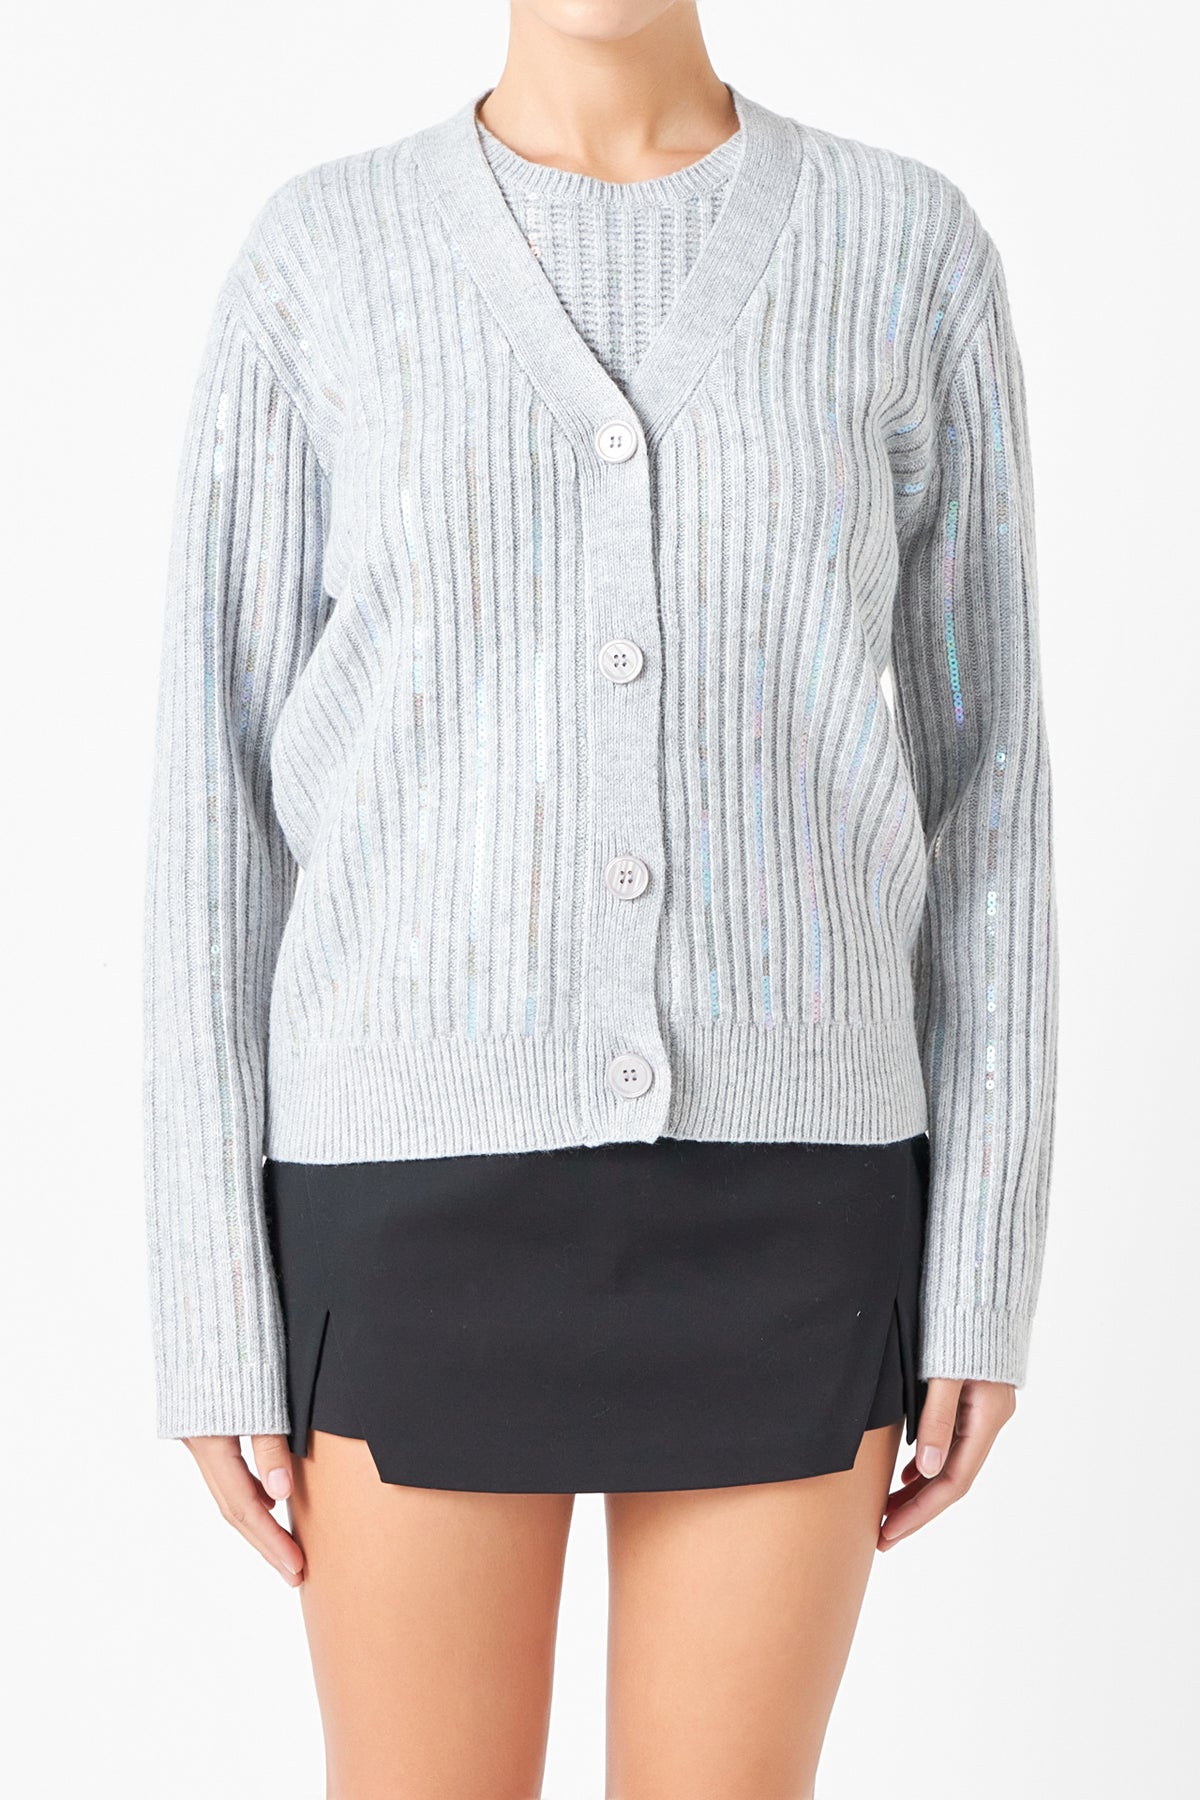 ENDLESS ROSE - Sequins Cardigan - SWEATERS & KNITS available at Objectrare